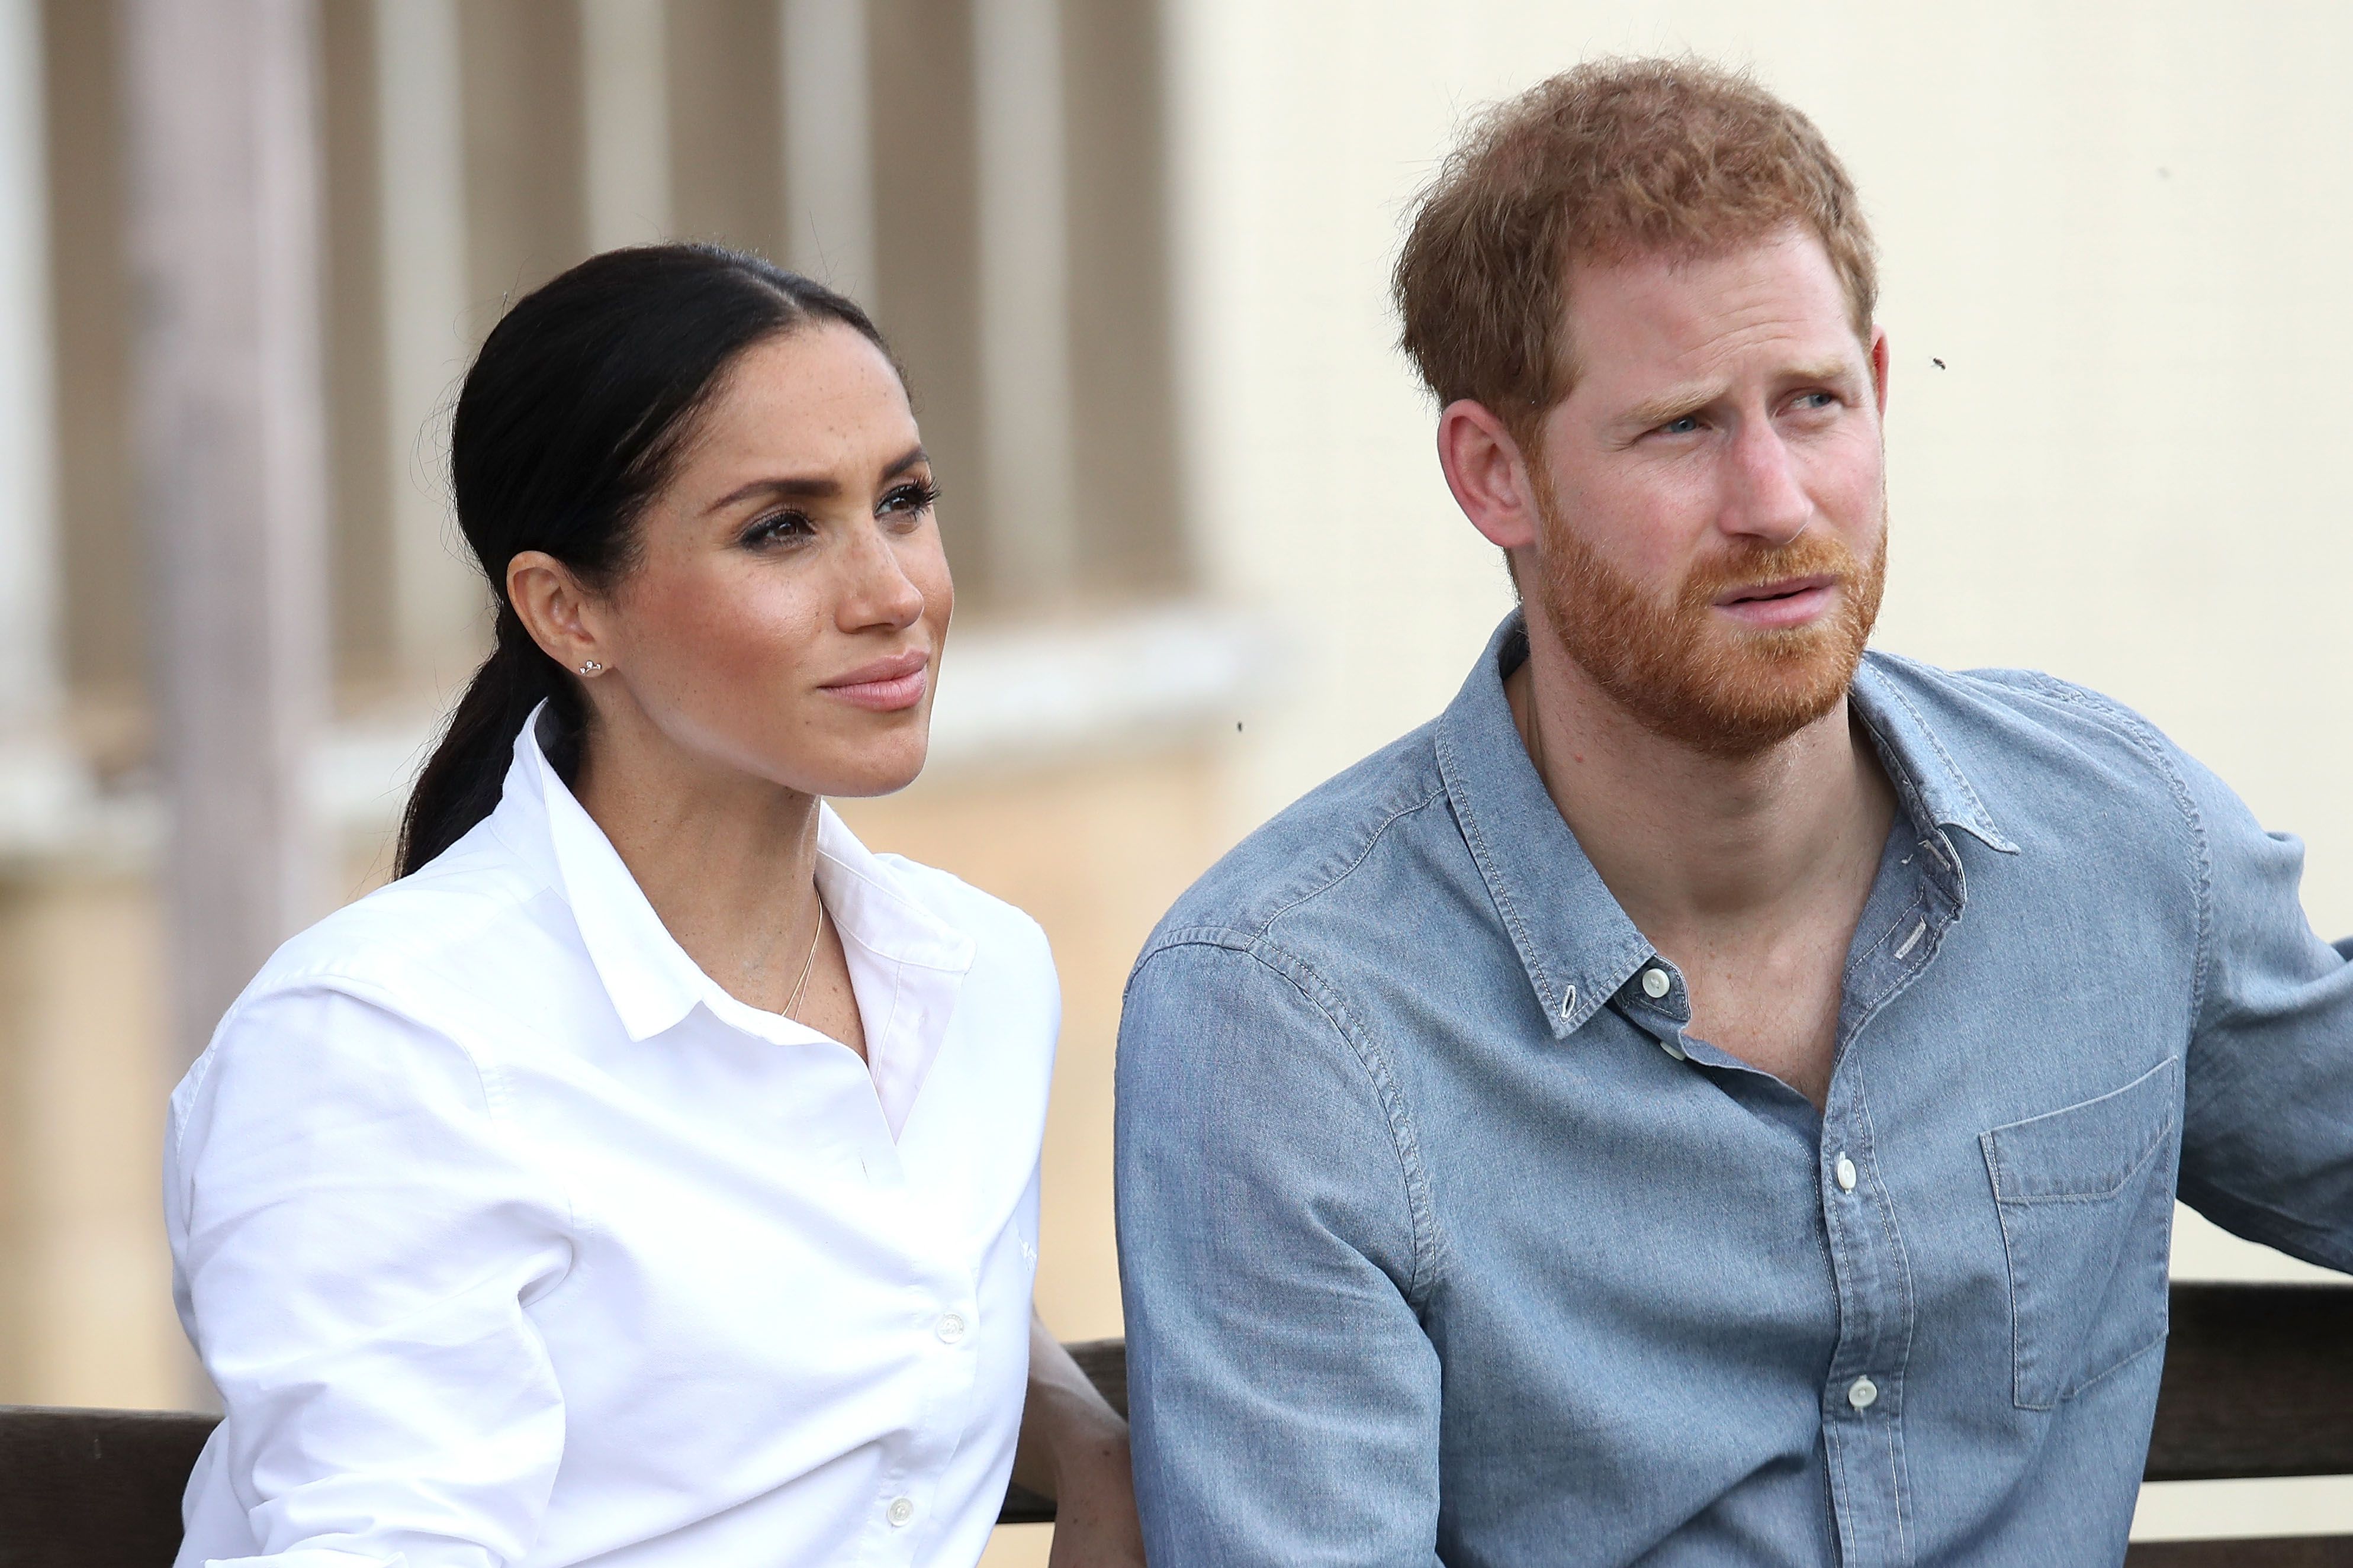 Prince Harry Says He Cannot Bring Archie and Lilibet to the UK Without Police Protection